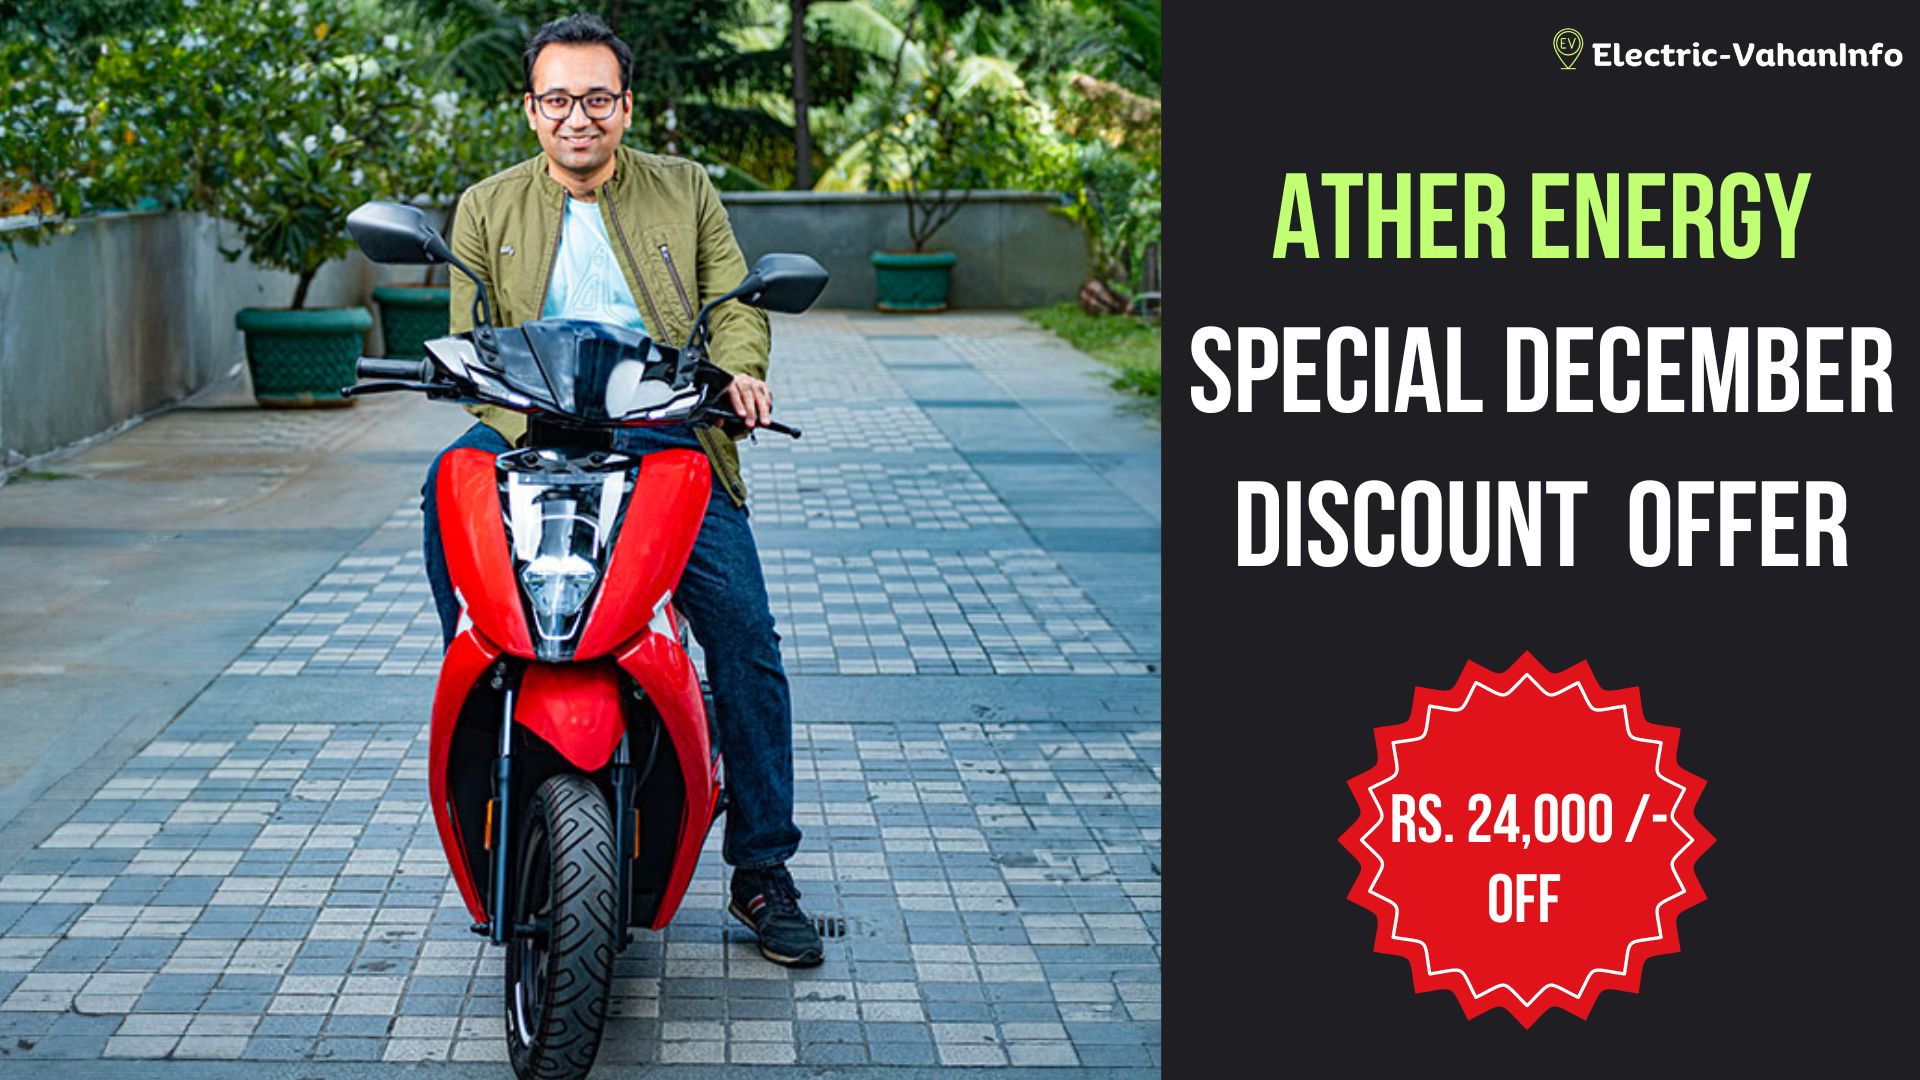 https://electric-vahaninfo.com/ather-energy-offers-special-discount-of-24000-on-450s-and-450x/